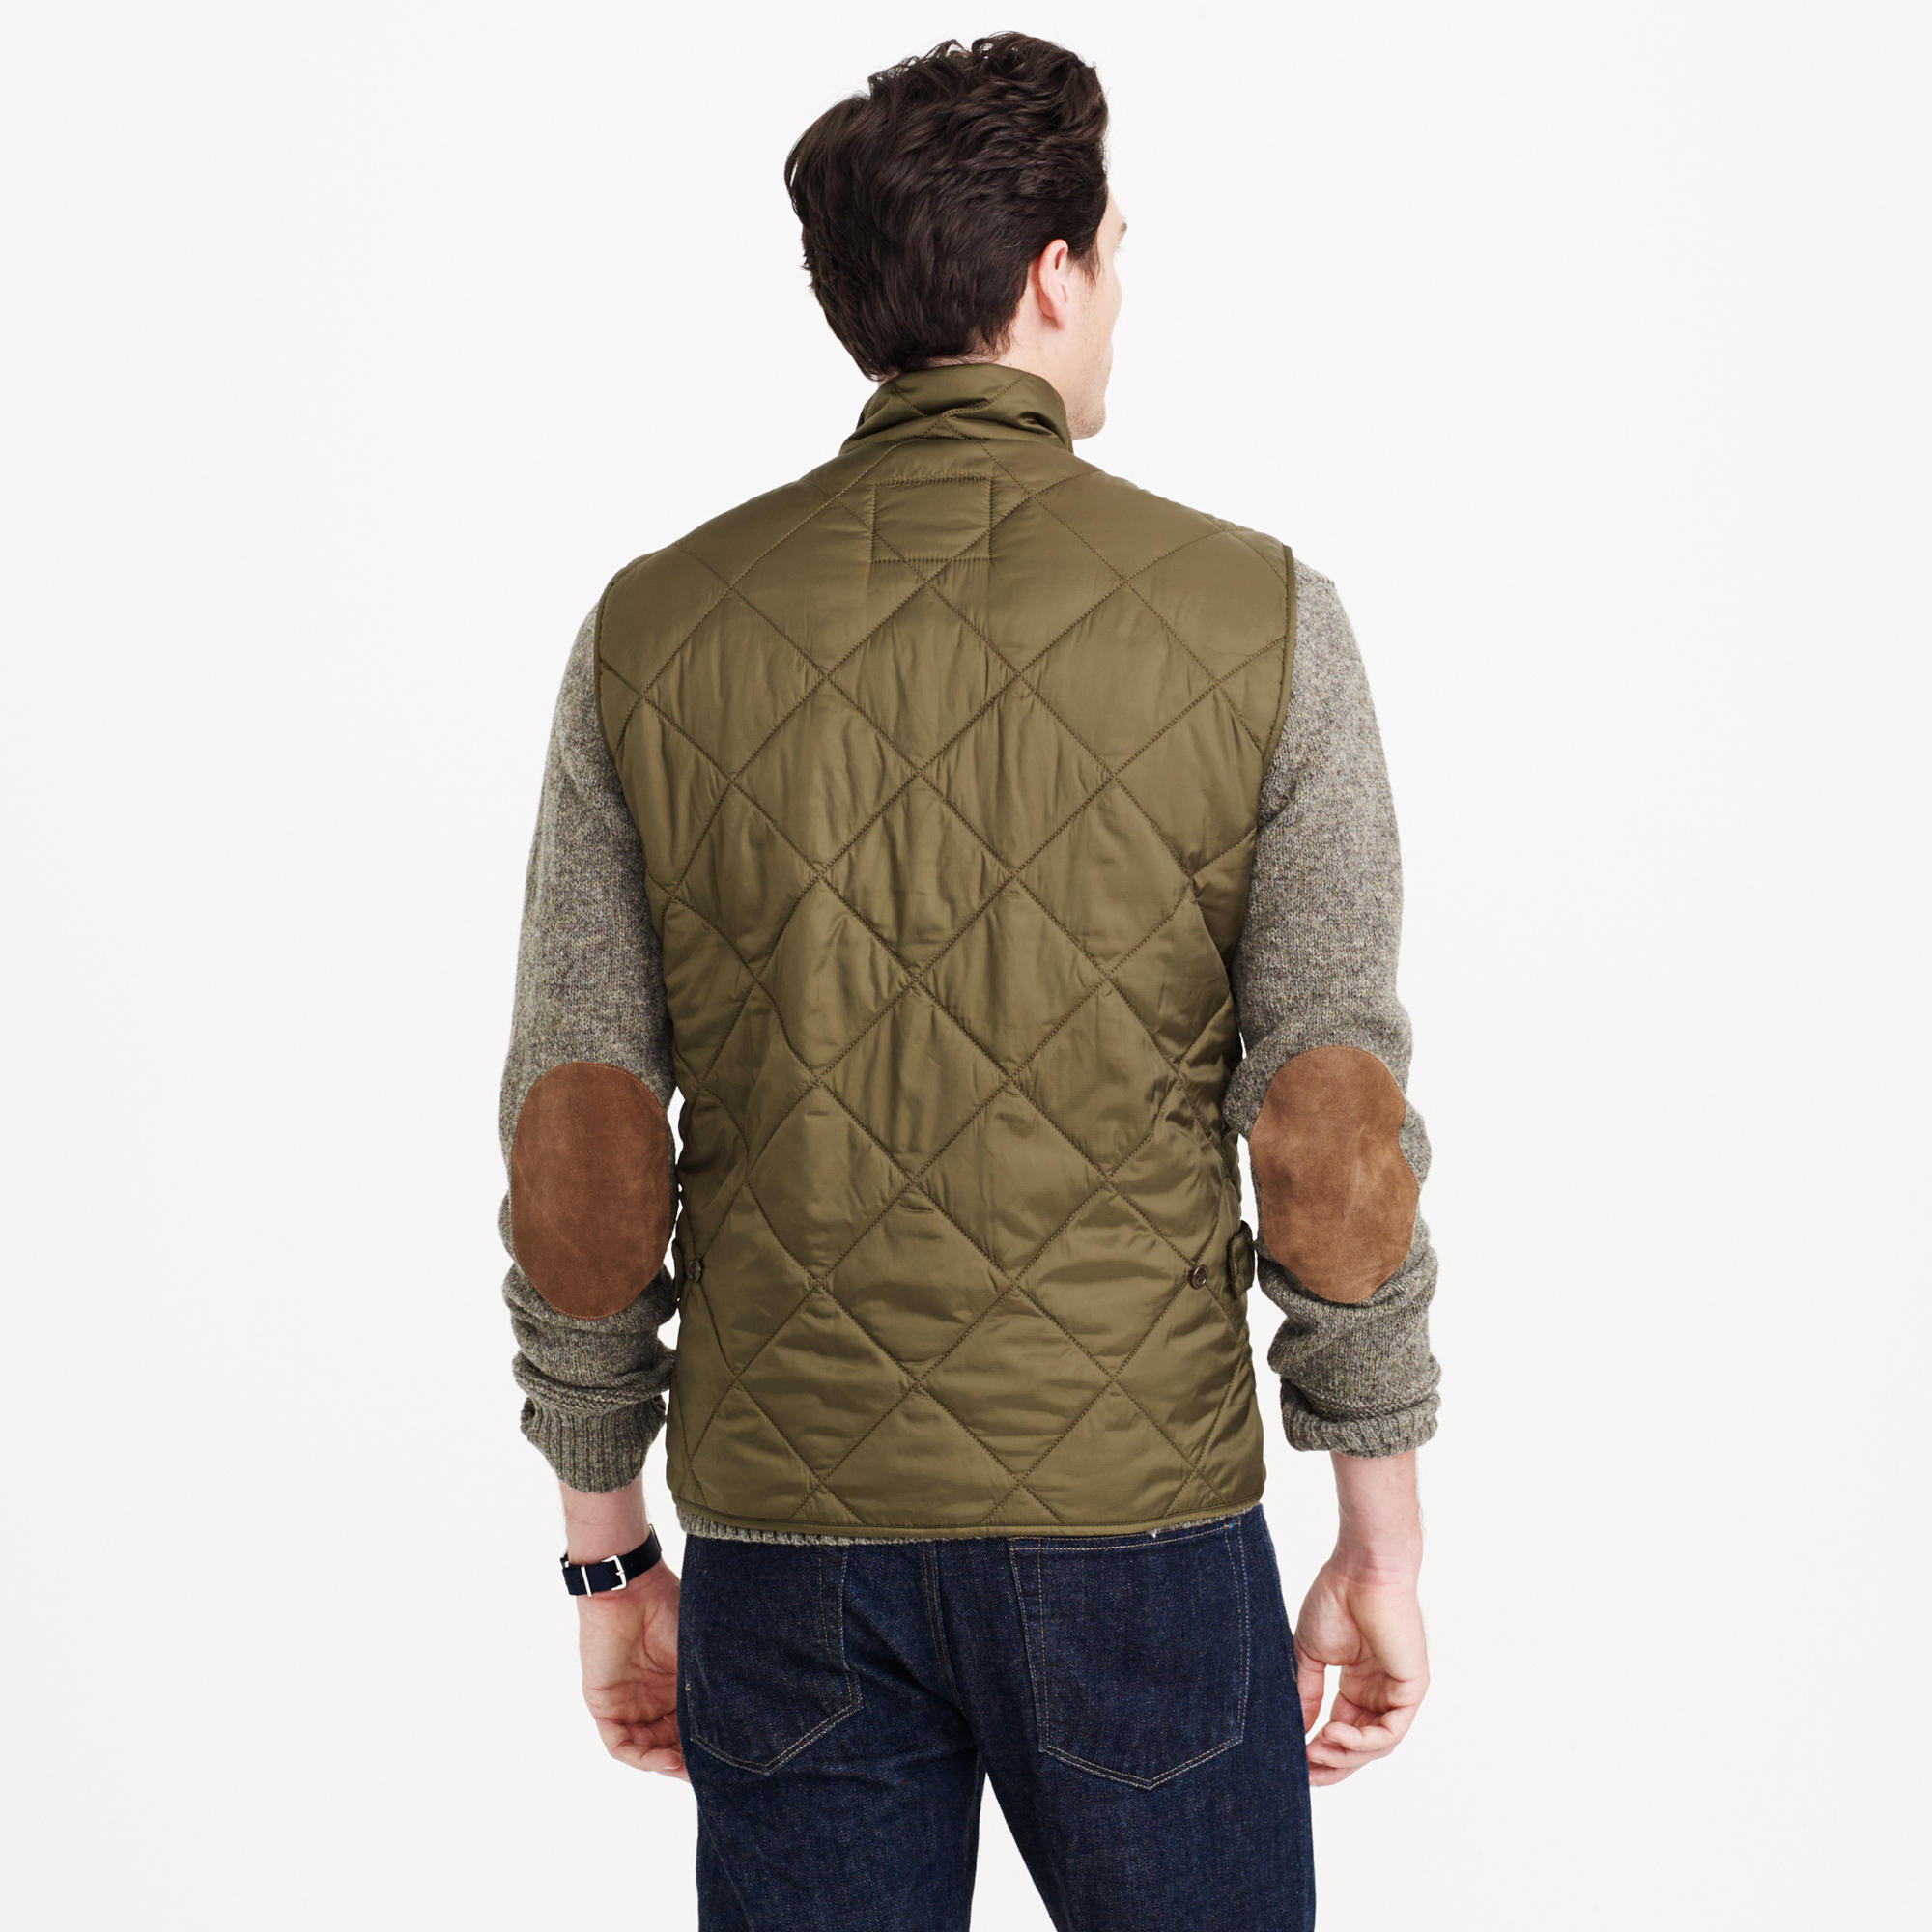 J.Crew Nylon Sussex Quilted Vest in Green for Men - Lyst